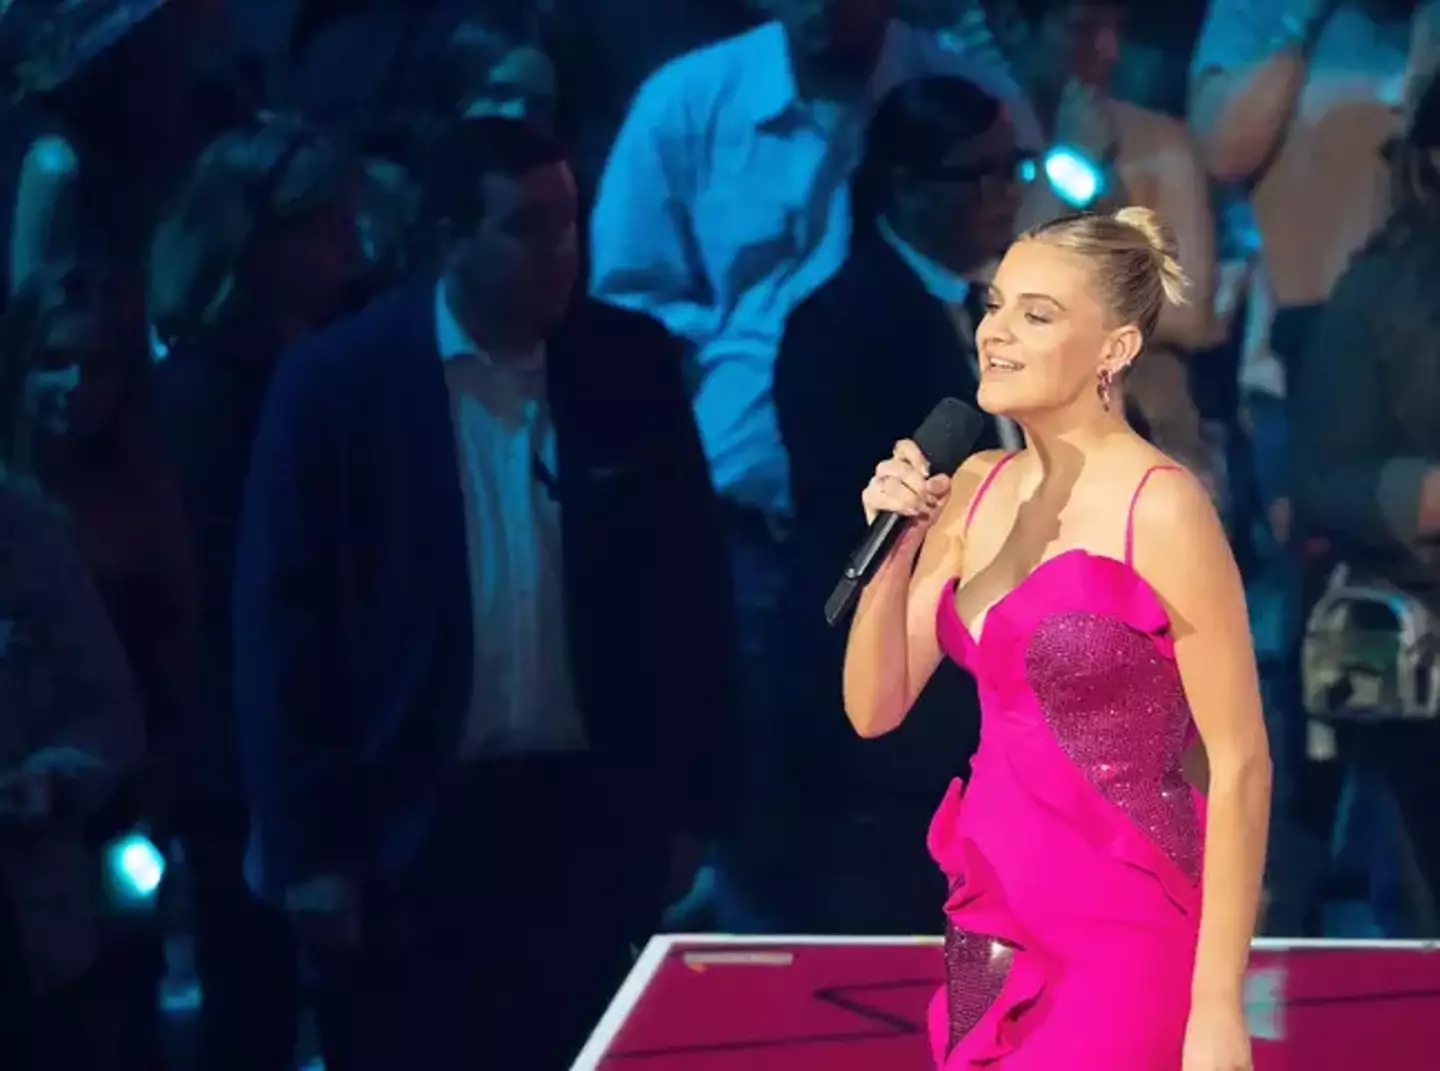 Kelsea Ballerini wasn't upset at Nick Jonas and instead said it was 'awesome' that she got to perform with him.